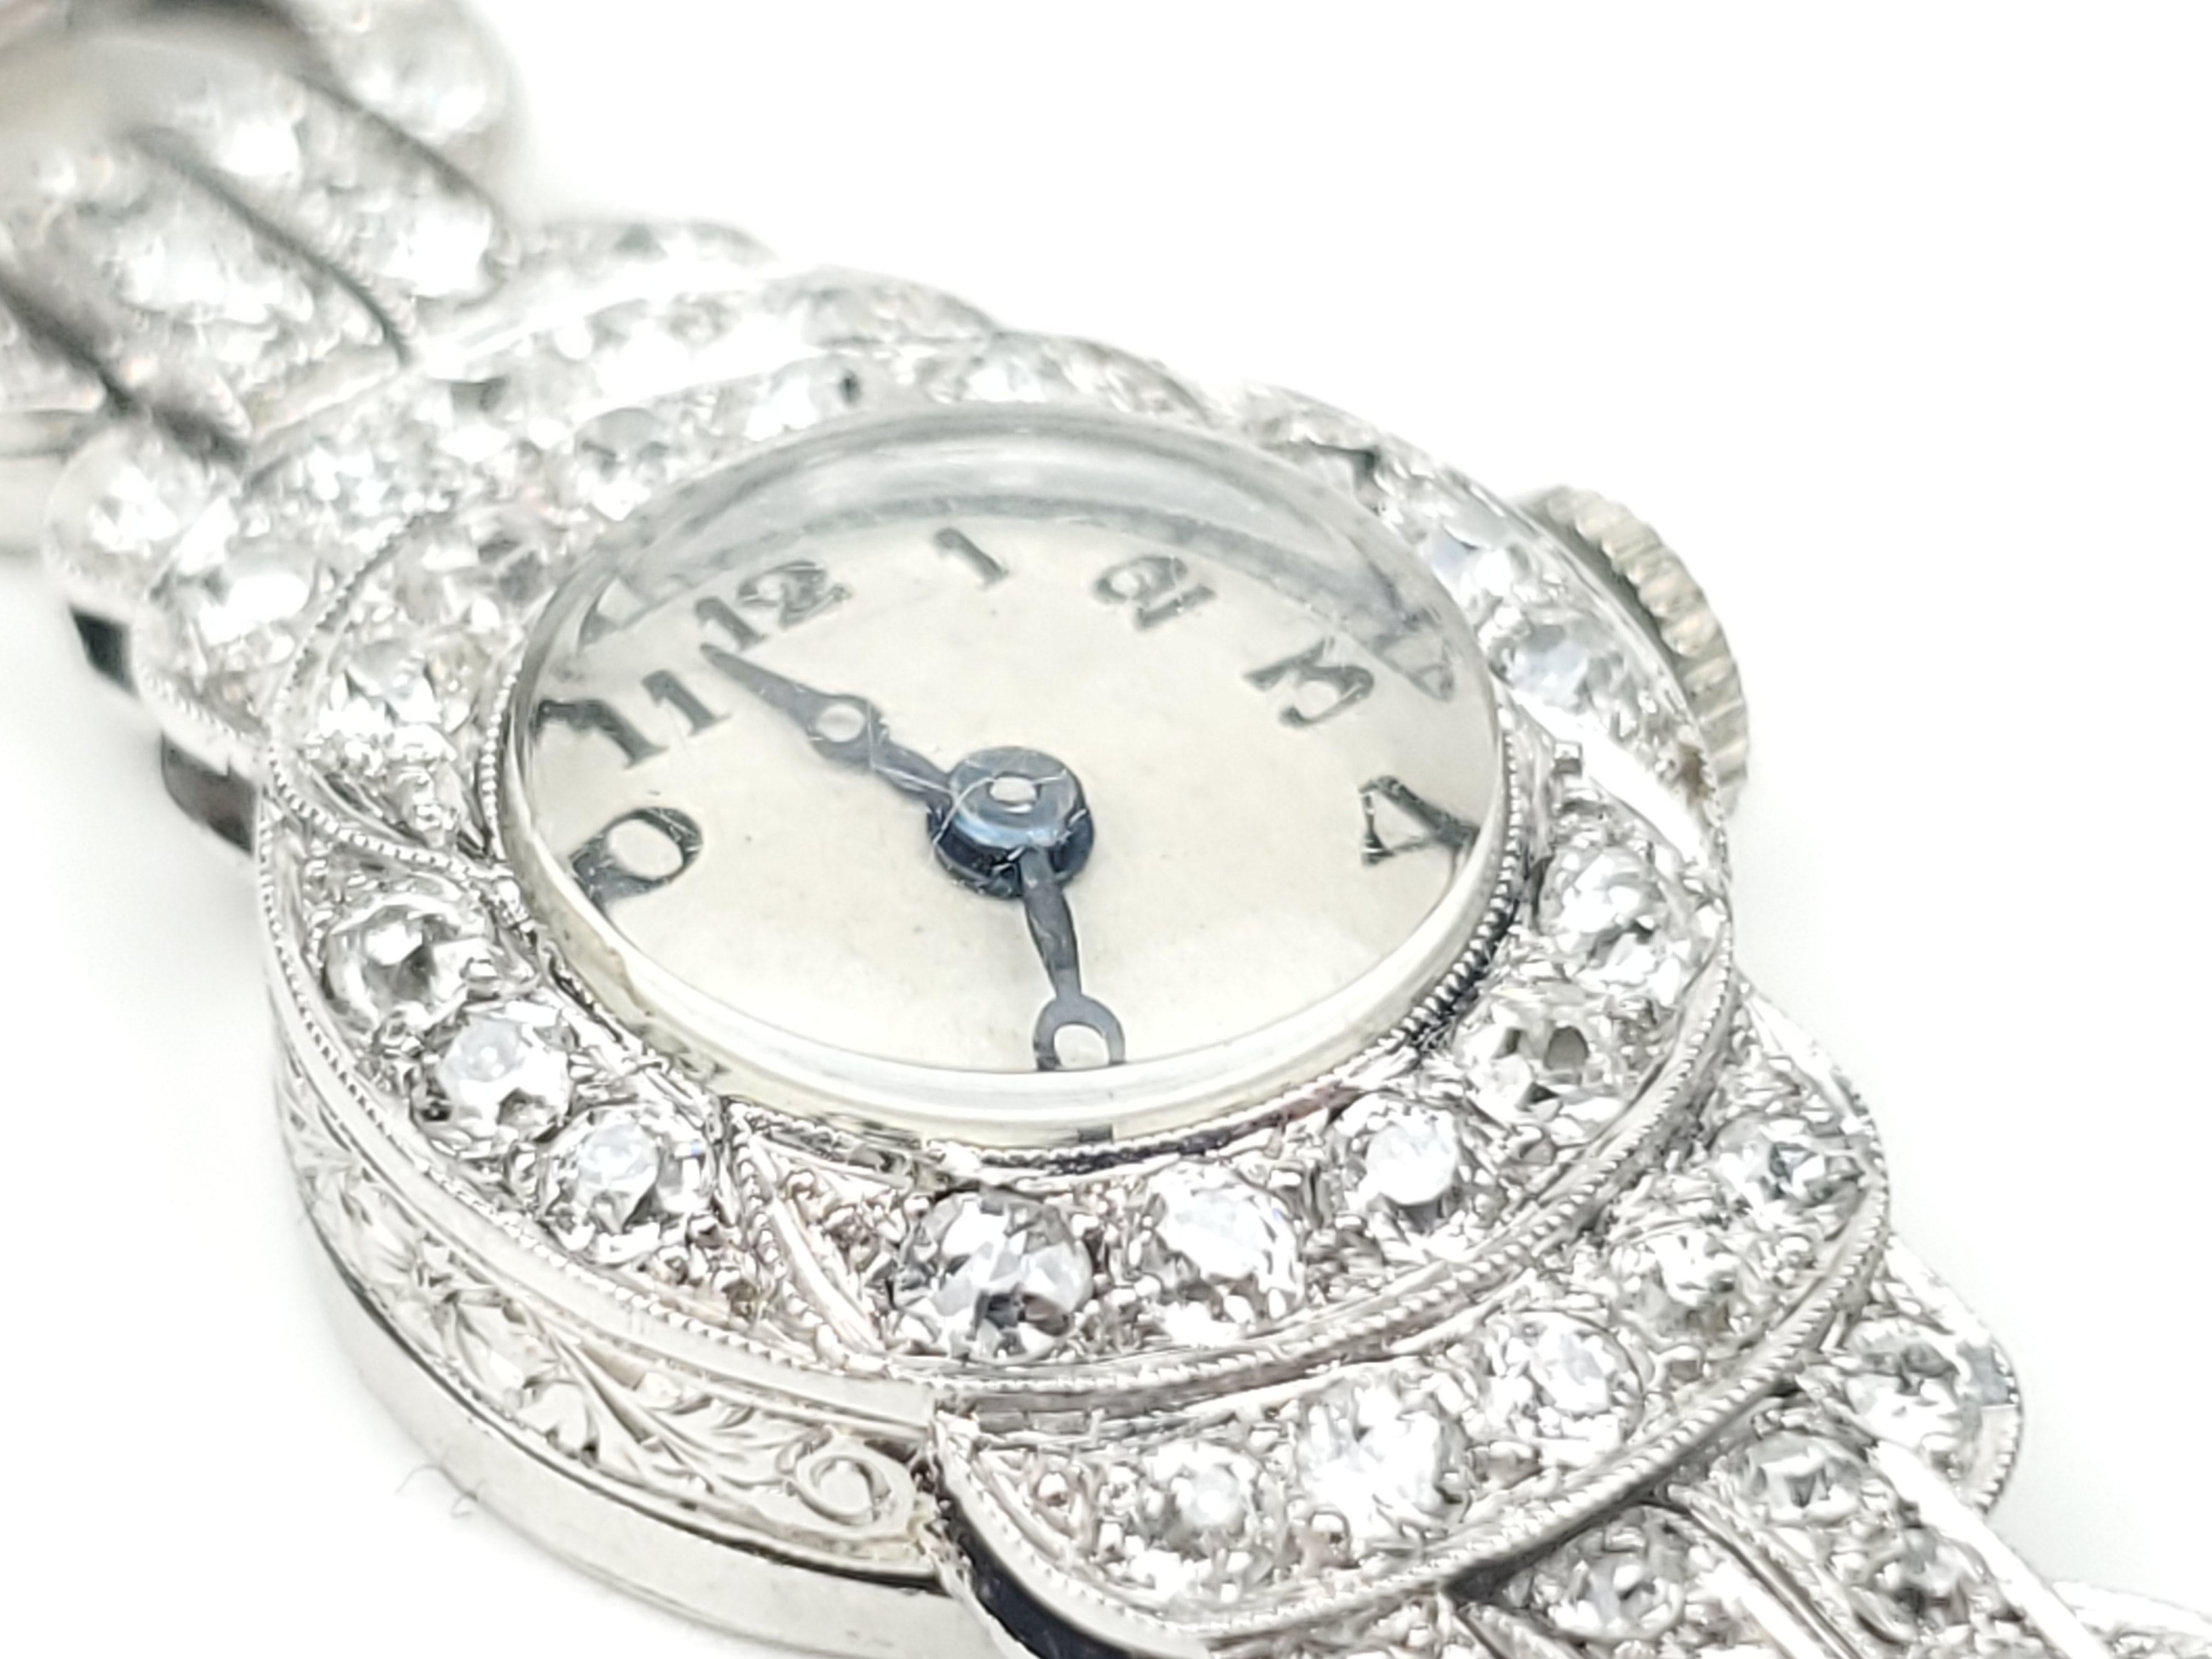 Vintage Rado Ladies Diamond and Platinum Dress Watch
Two carets of diamonds encrusting in a superb nouveau style platinum watch.

Sometimes, wow! is your first reaction to seeing an amazing piece of art. As mundane as it is I have to admit that it